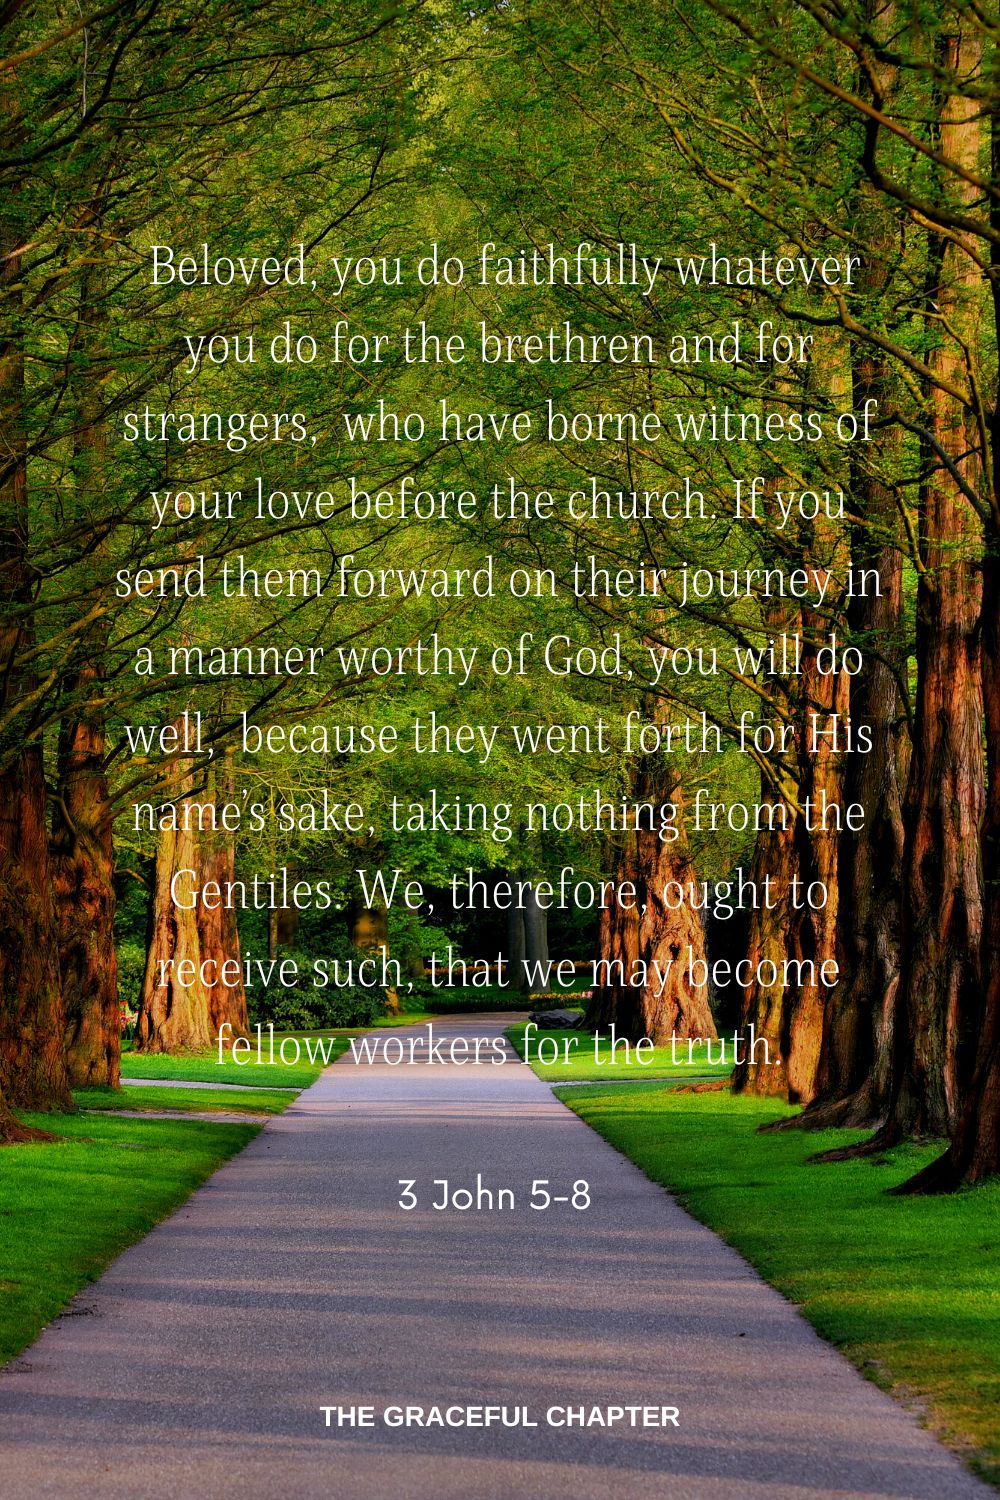  Beloved, you do faithfully whatever you do for the brethren and for strangers,  who have borne witness of your love before the church. If you send them forward on their journey in a manner worthy of God, you will do well,  because they went forth for His name’s sake, taking nothing from the Gentiles. We, therefore, ought to receive such, that we may become fellow workers for the truth. 3 John 5-8 